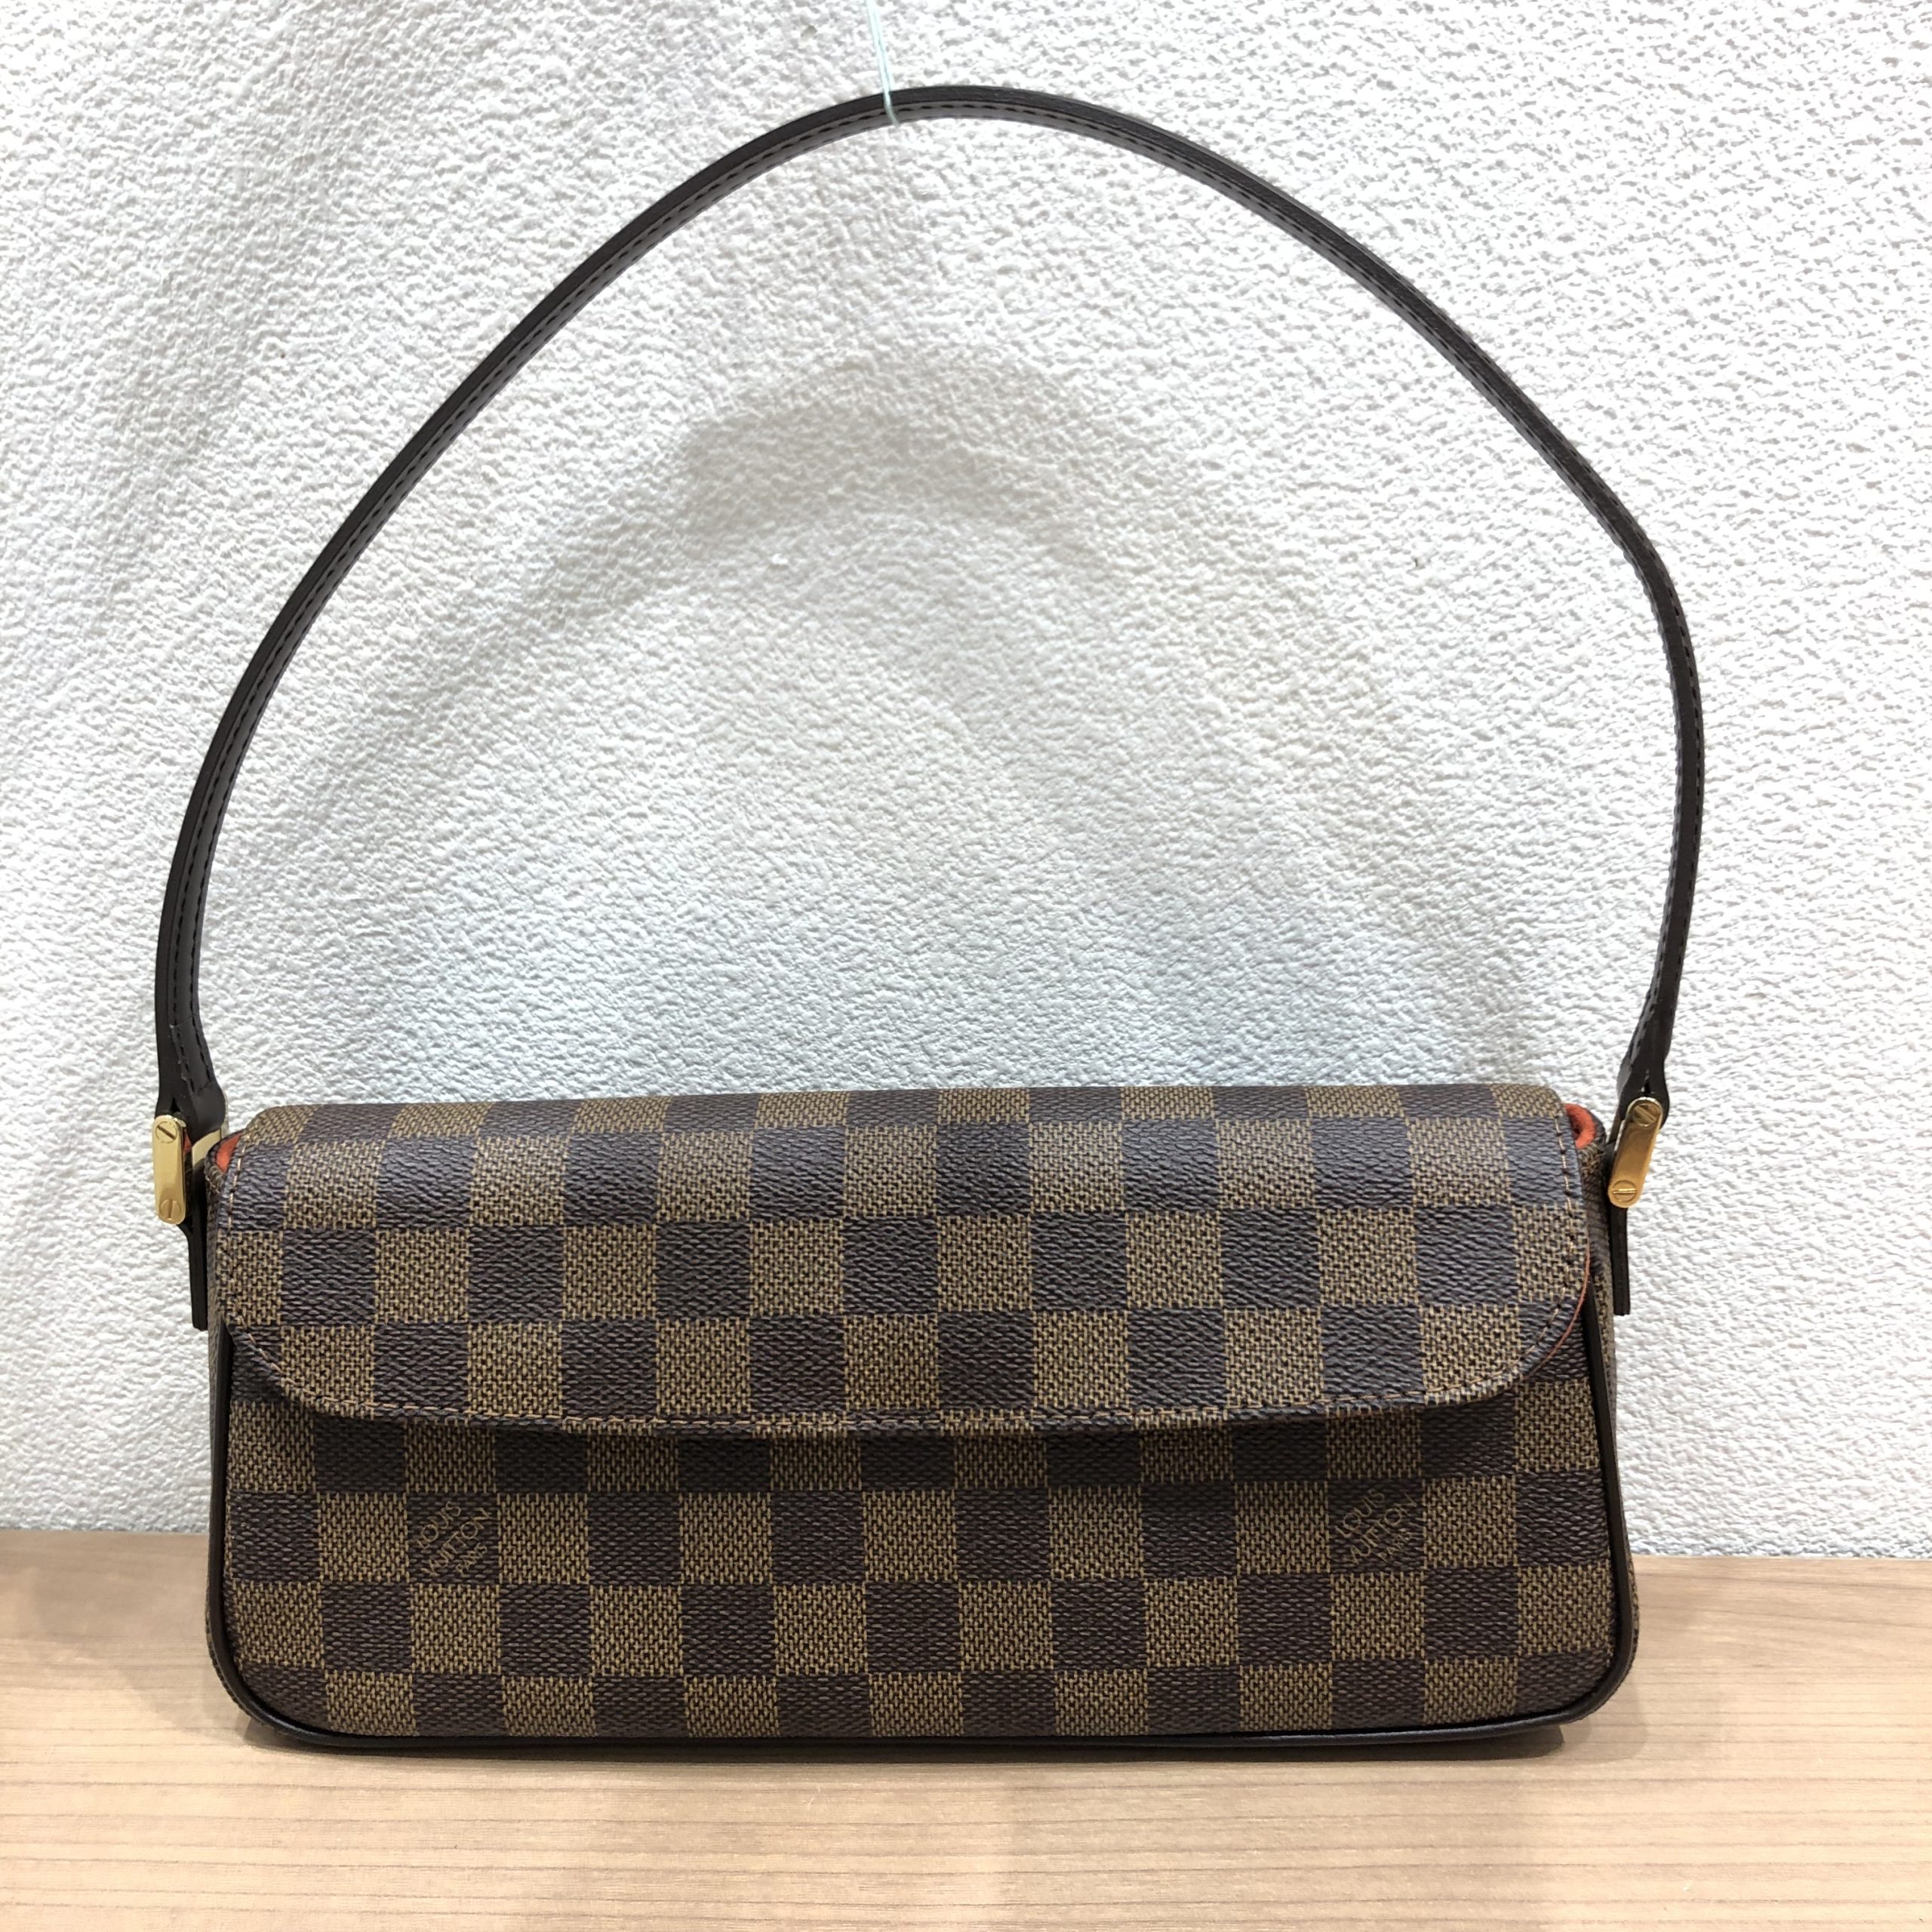 【Louis Vuitton/ルイヴィトン】ダミエ レコレータ N51299